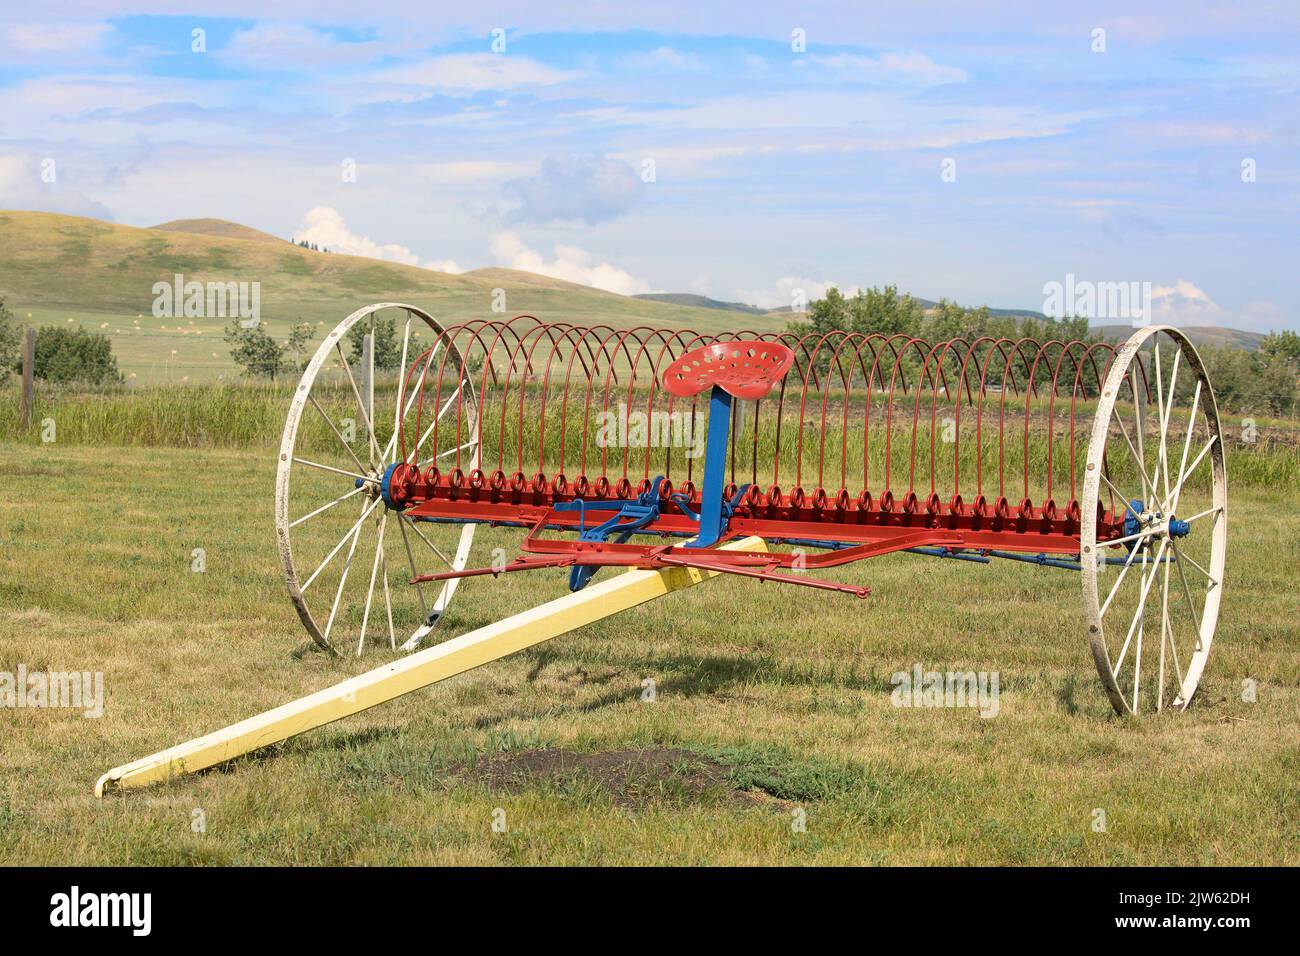 Vintage farm cultivator in a field on the Bar U Ranch National Historic Site, southern  Alberta, Canada. Stock Photo